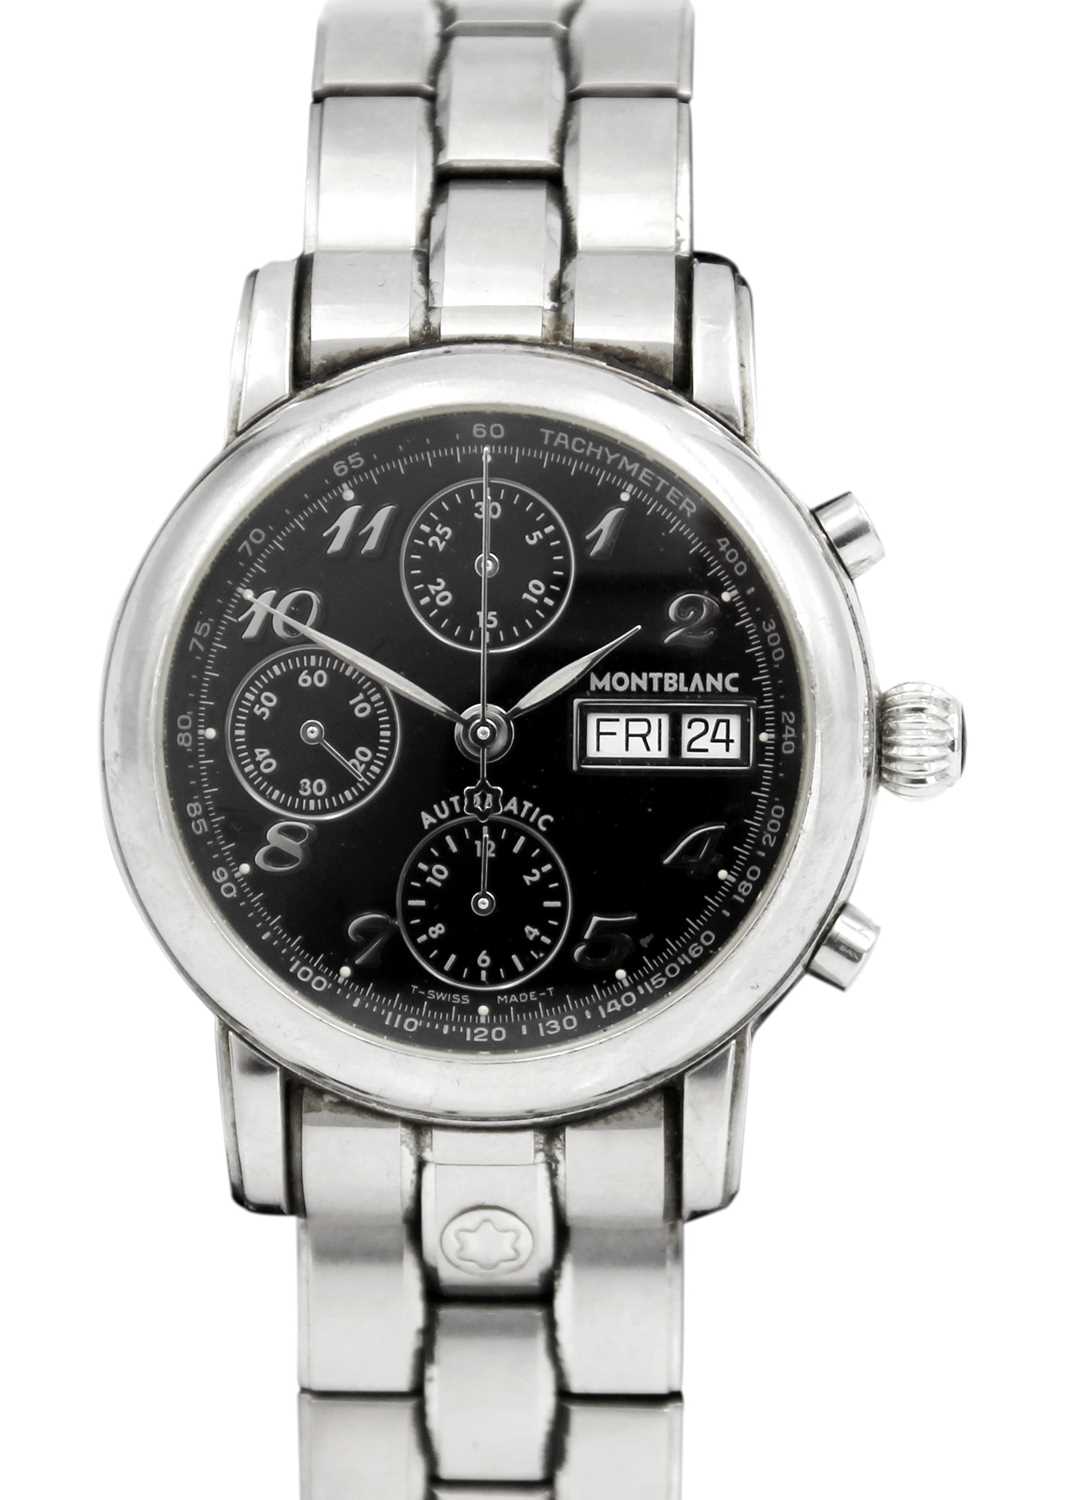 Lot 165 - MONTBLANC - A stainless steel gentleman's automatic chronograph bracelet wristwatch.